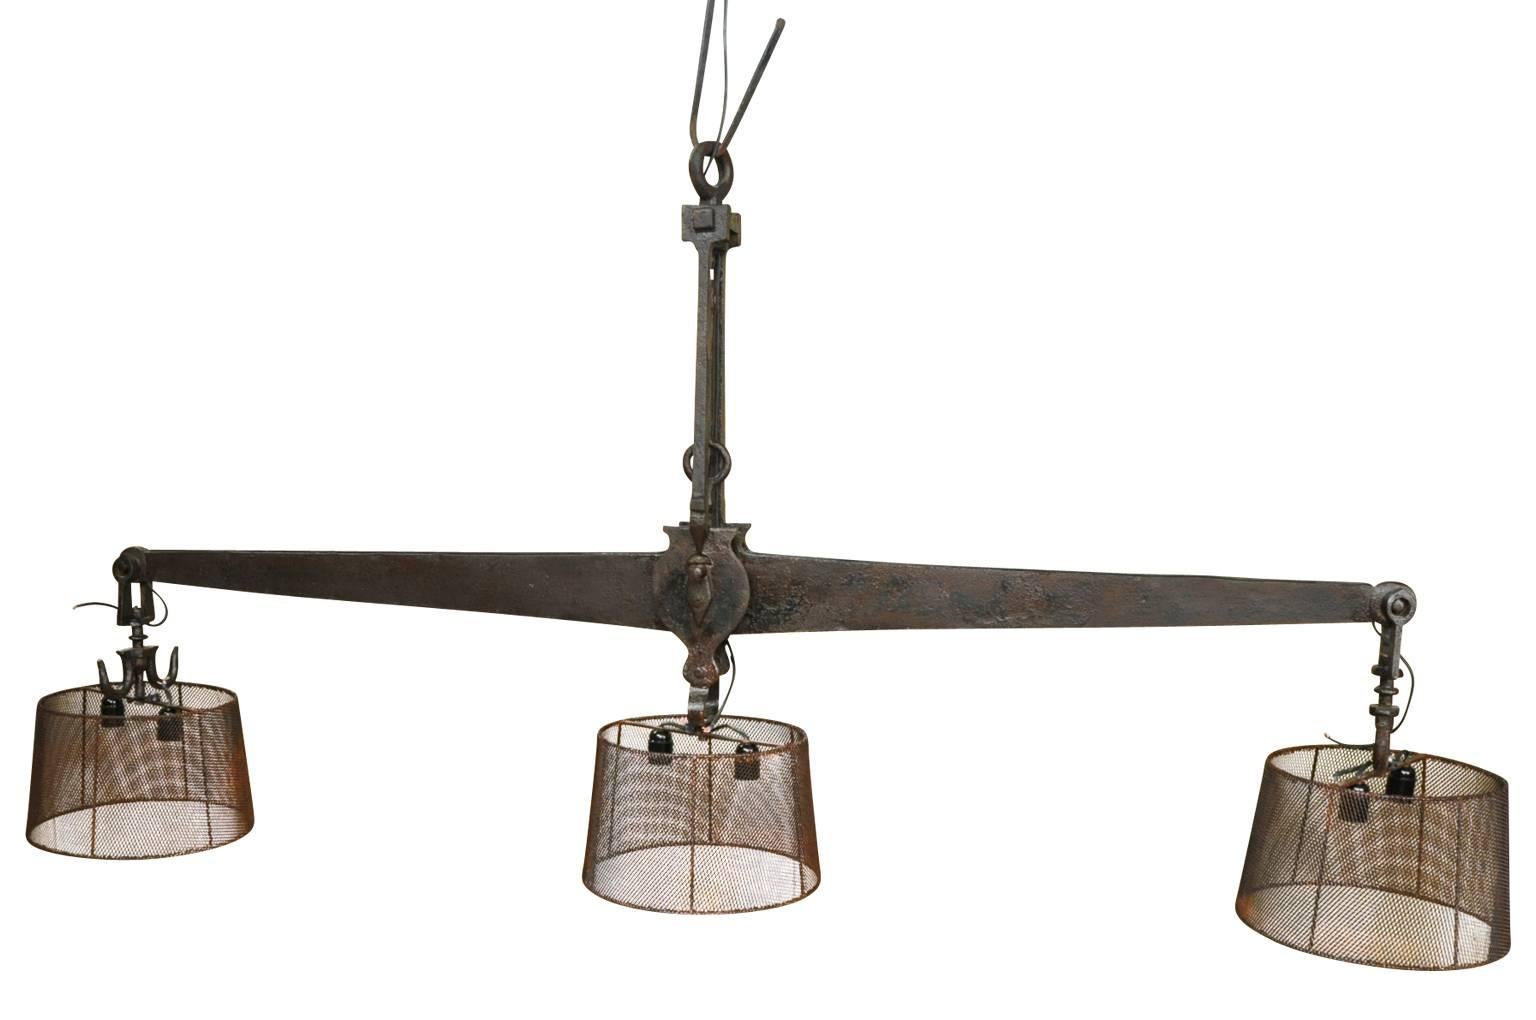 A monumental 19th century iron butcher's scale - now as a chandelier. A fantastic statement piece over a large kitchen island or in a great room. Inscribed with Barcelona Ano, 1875.